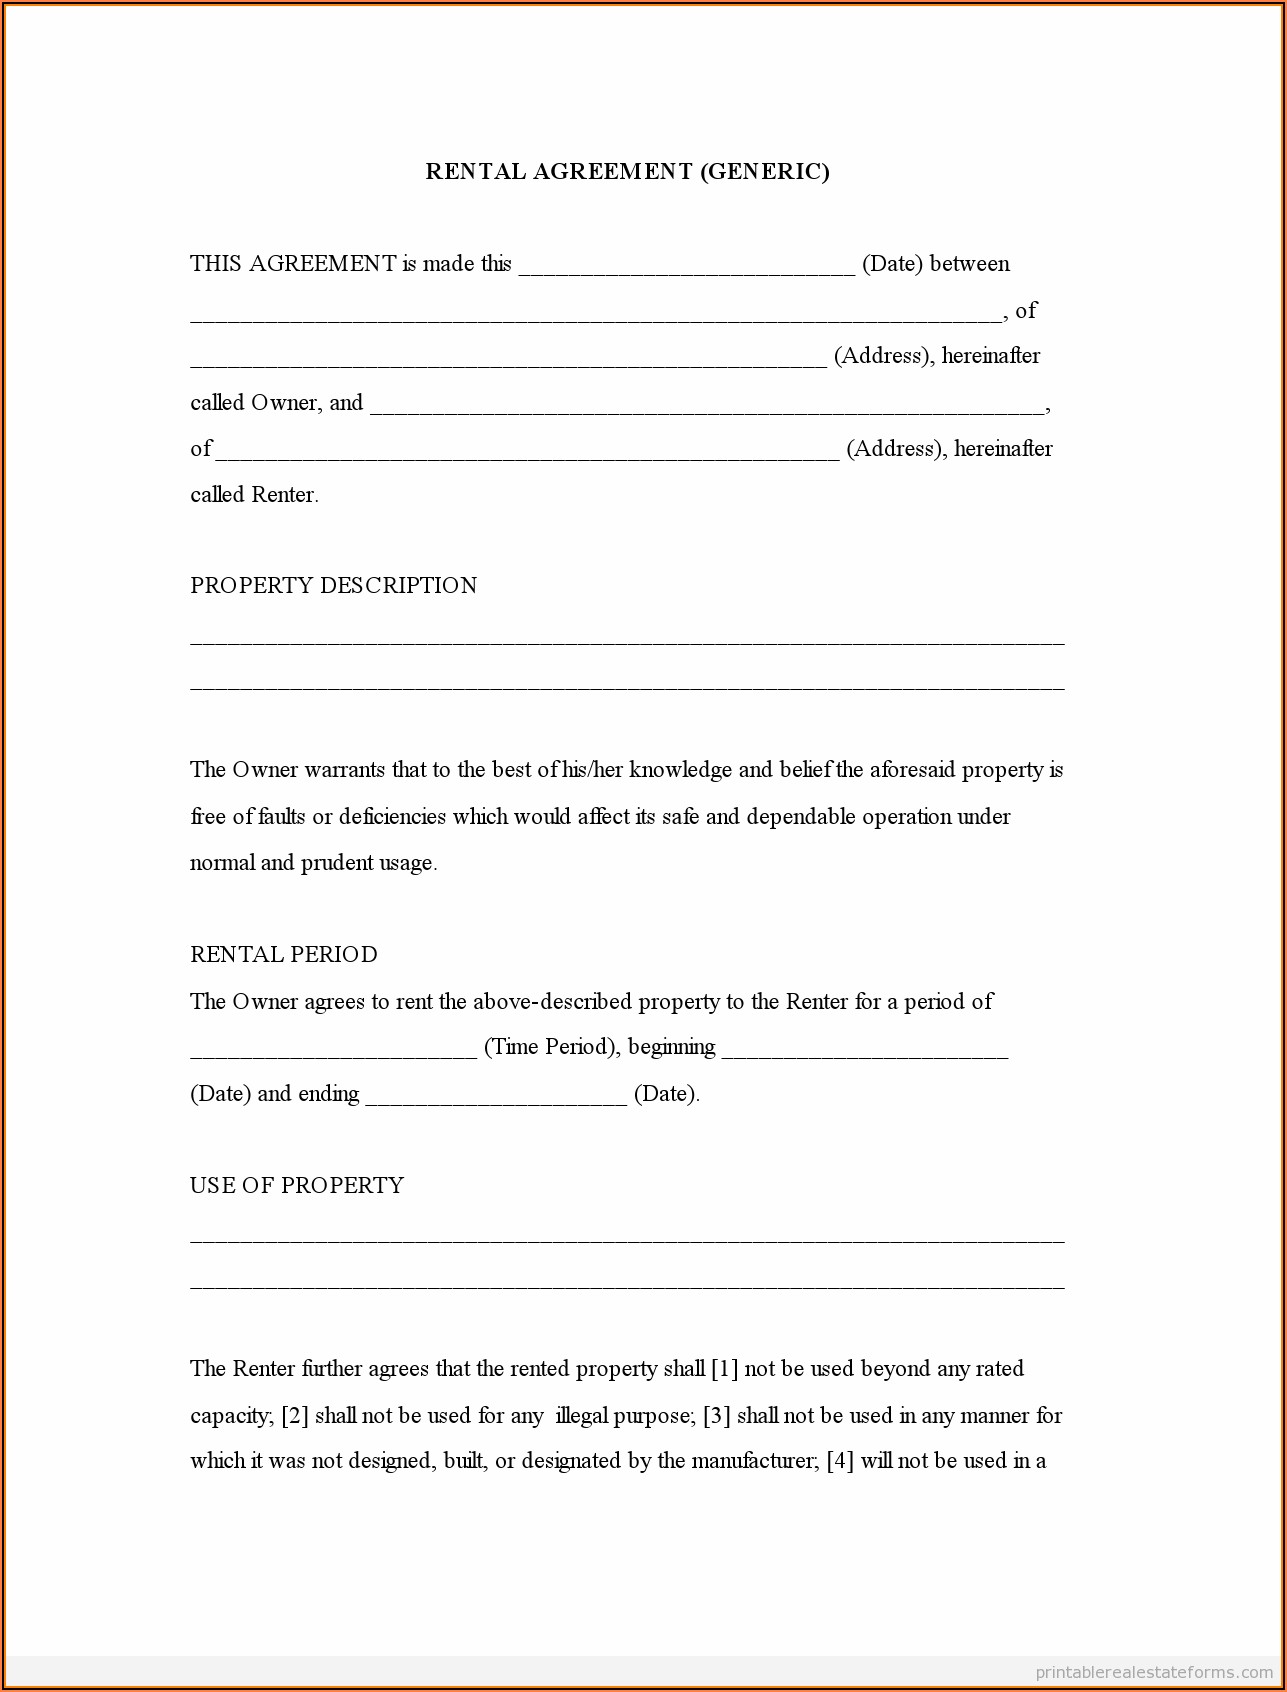 Free Printable Rental Lease Agreement Forms